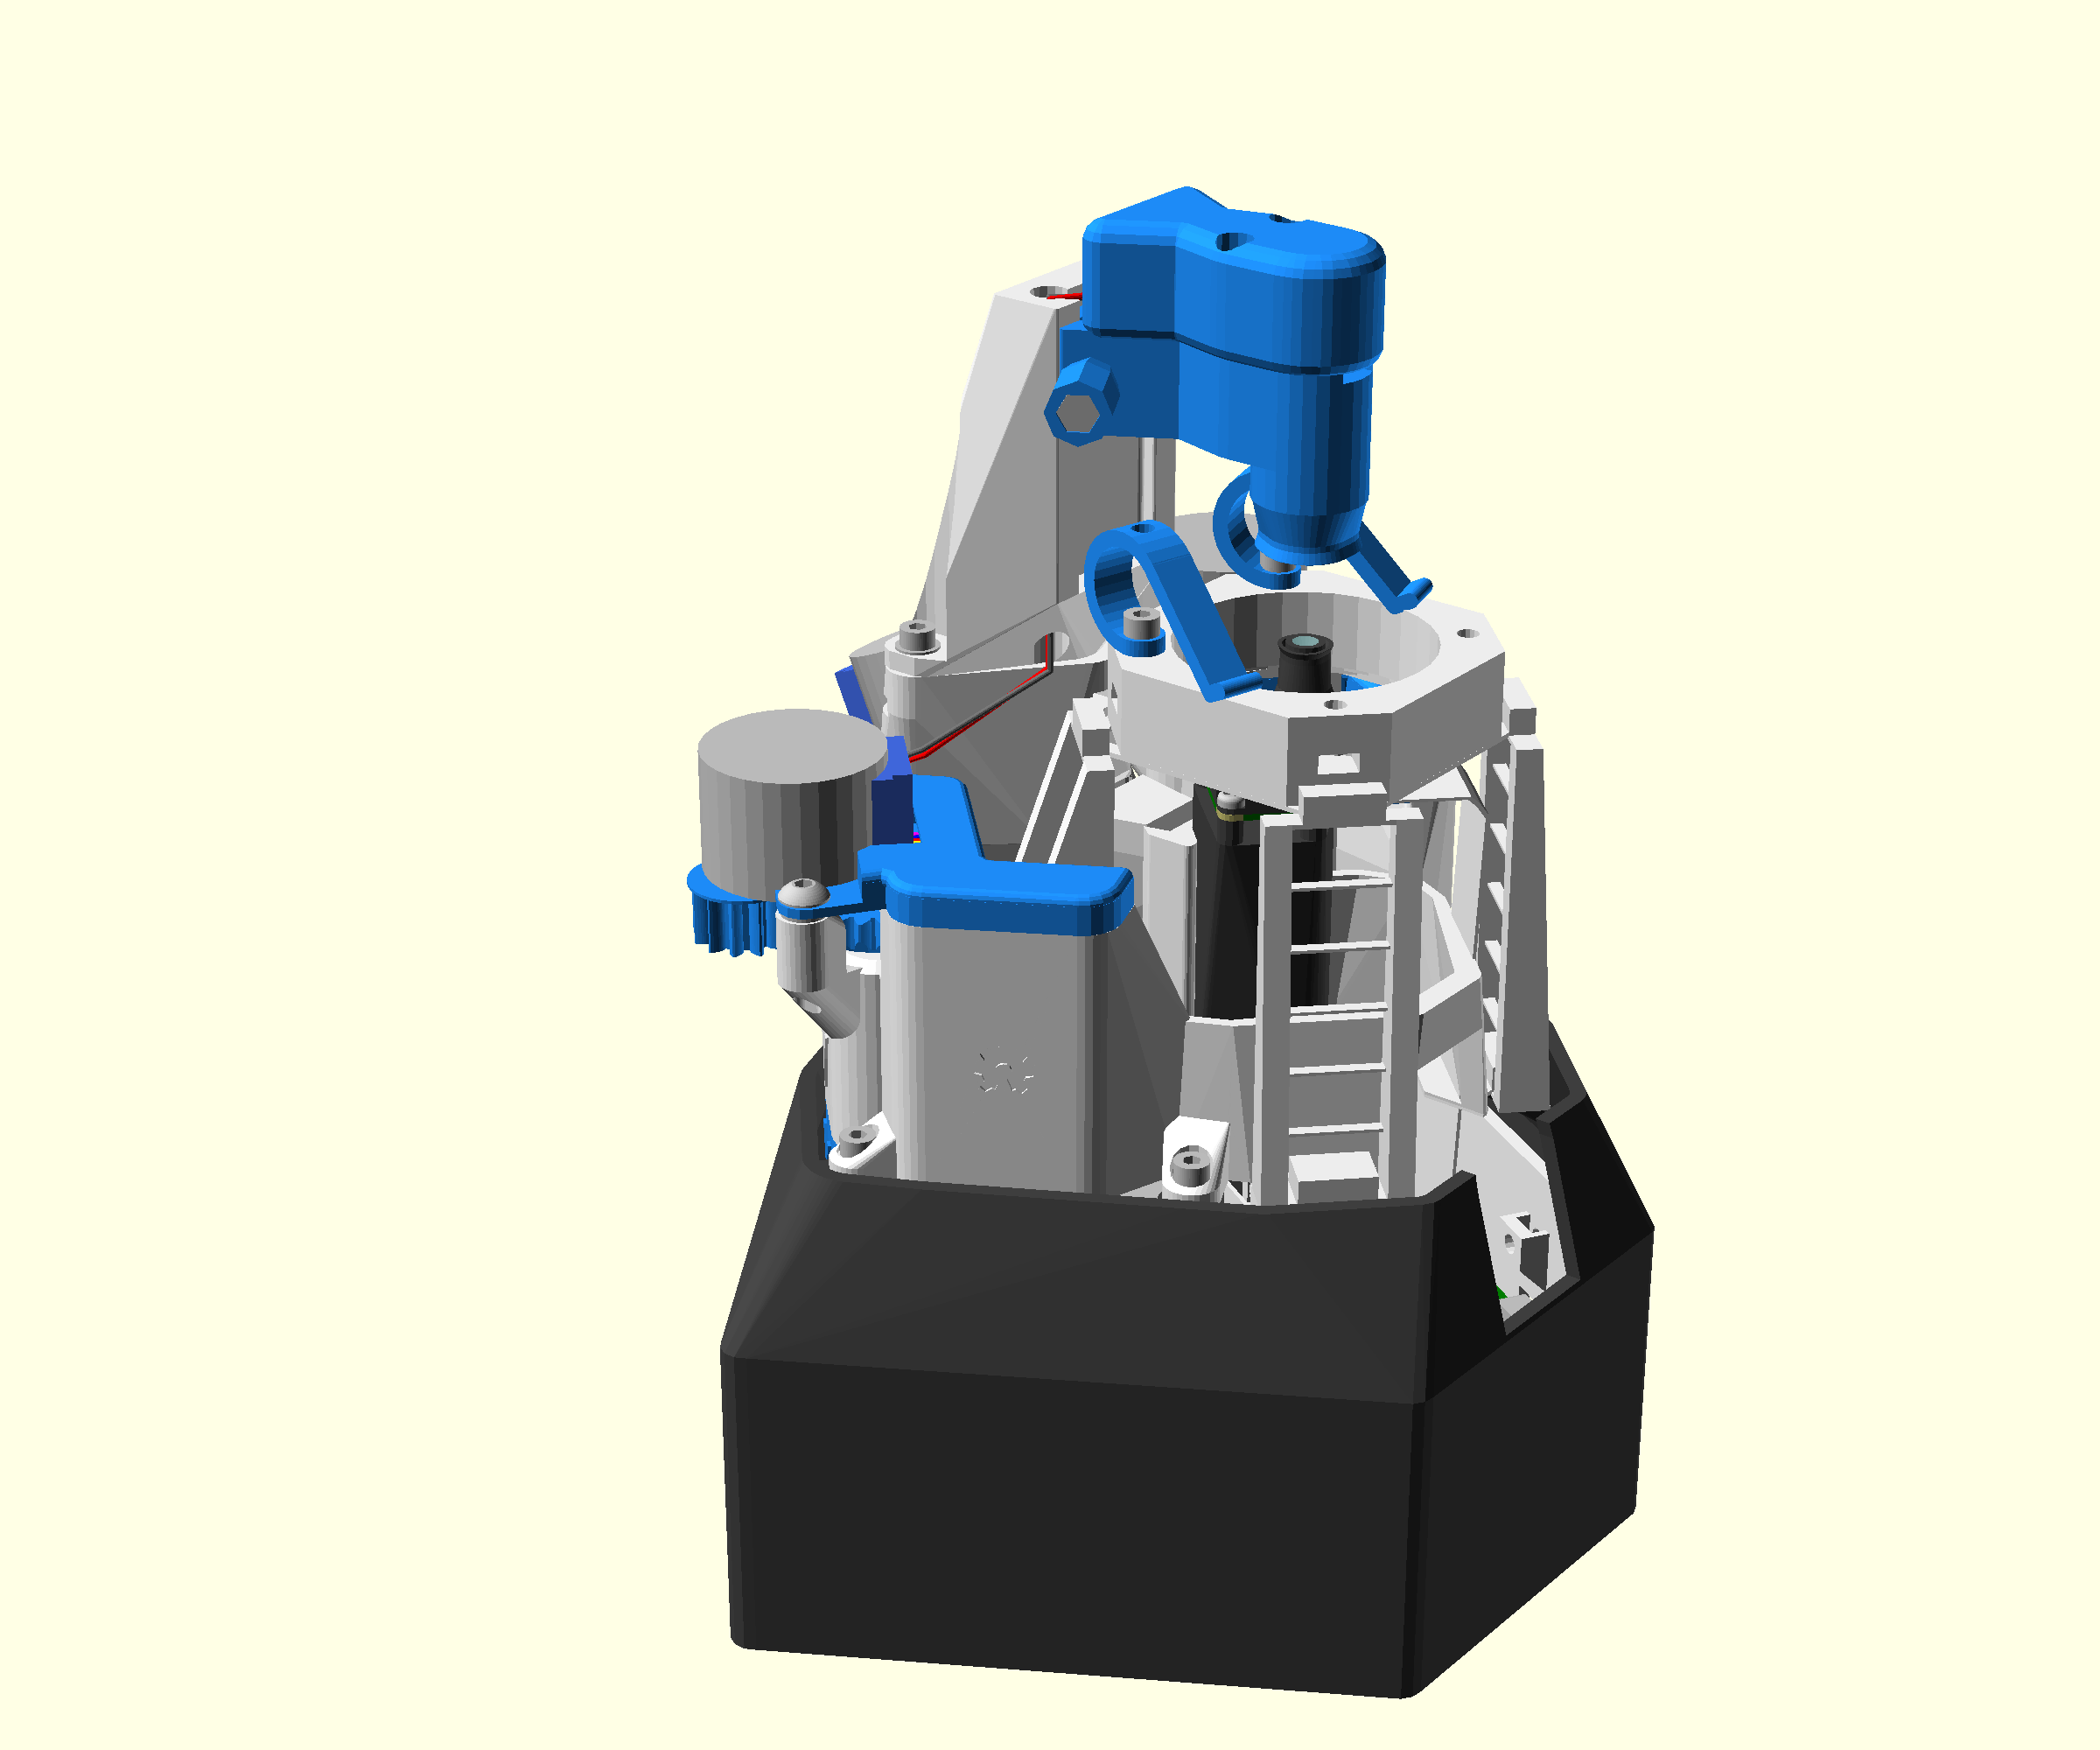 A render of the completed microscope using the Raspberry Pi camera module's lens.